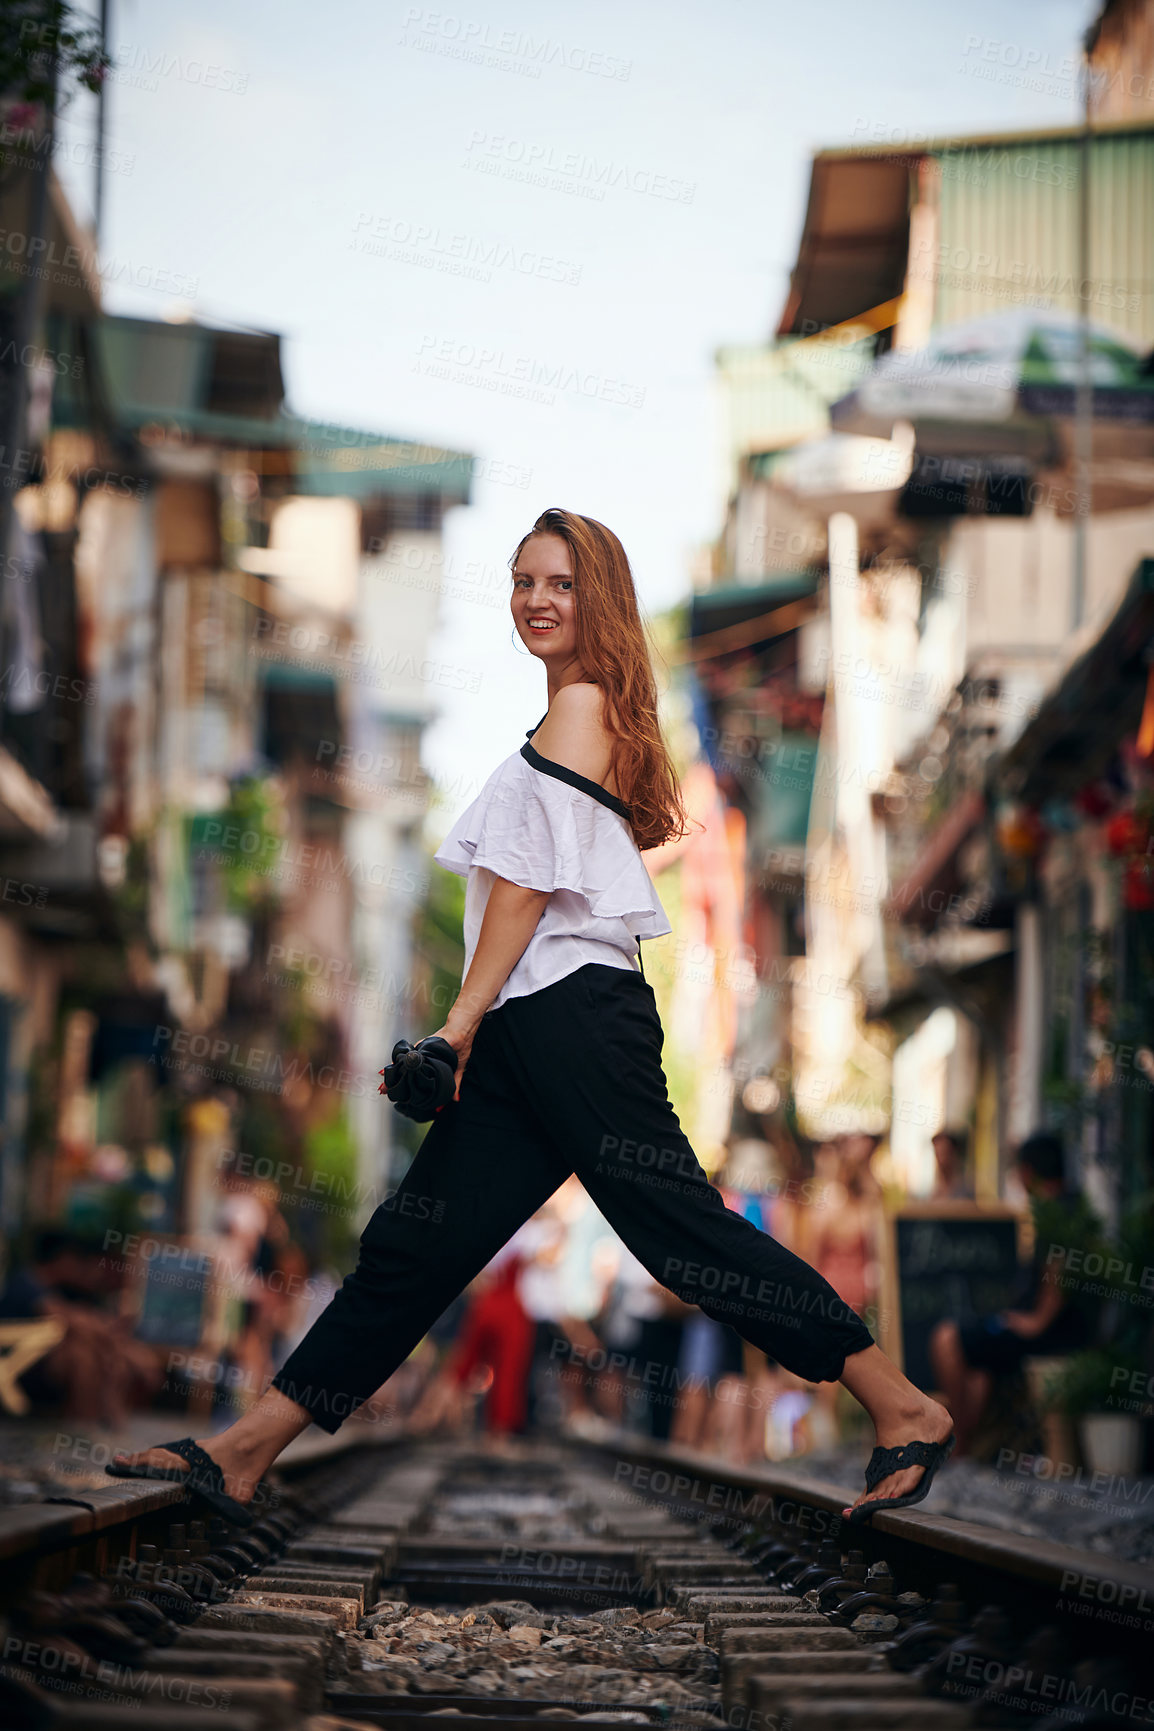 Buy stock photo Shot of a beautiful young woman exploring a foreign city